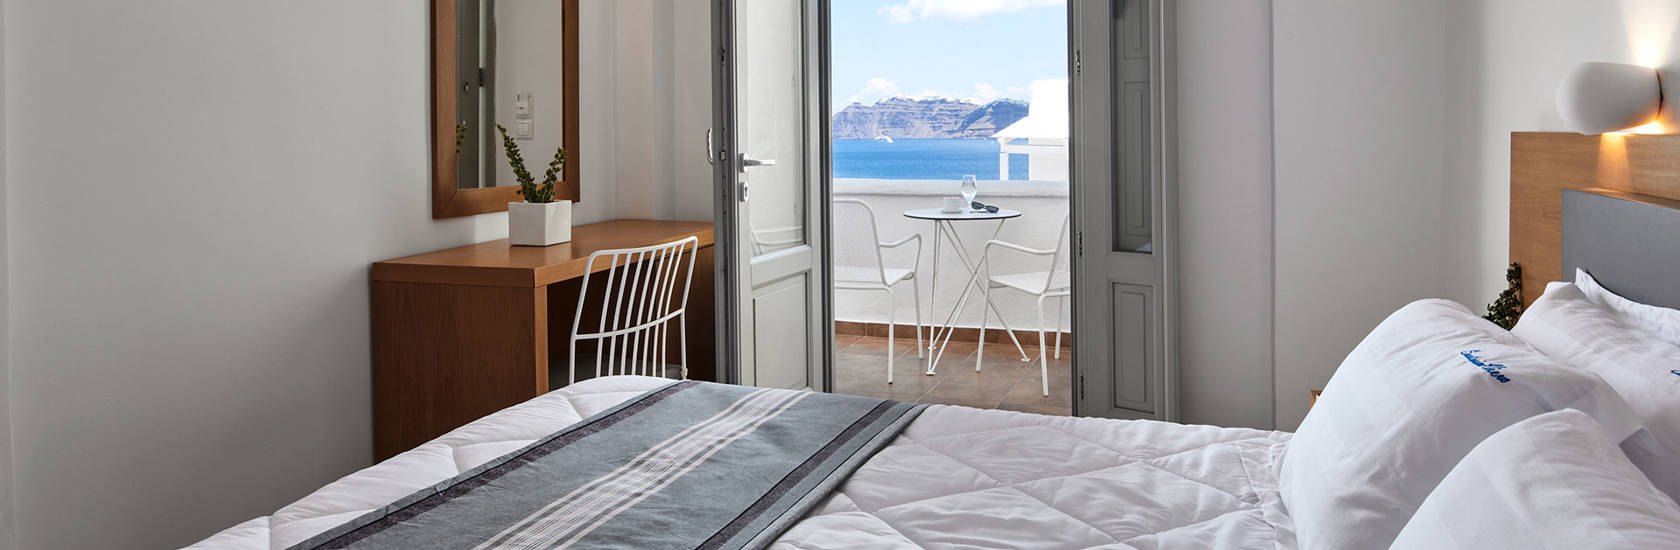 
Santorini View Hotel room with double bed, balcony and sea view